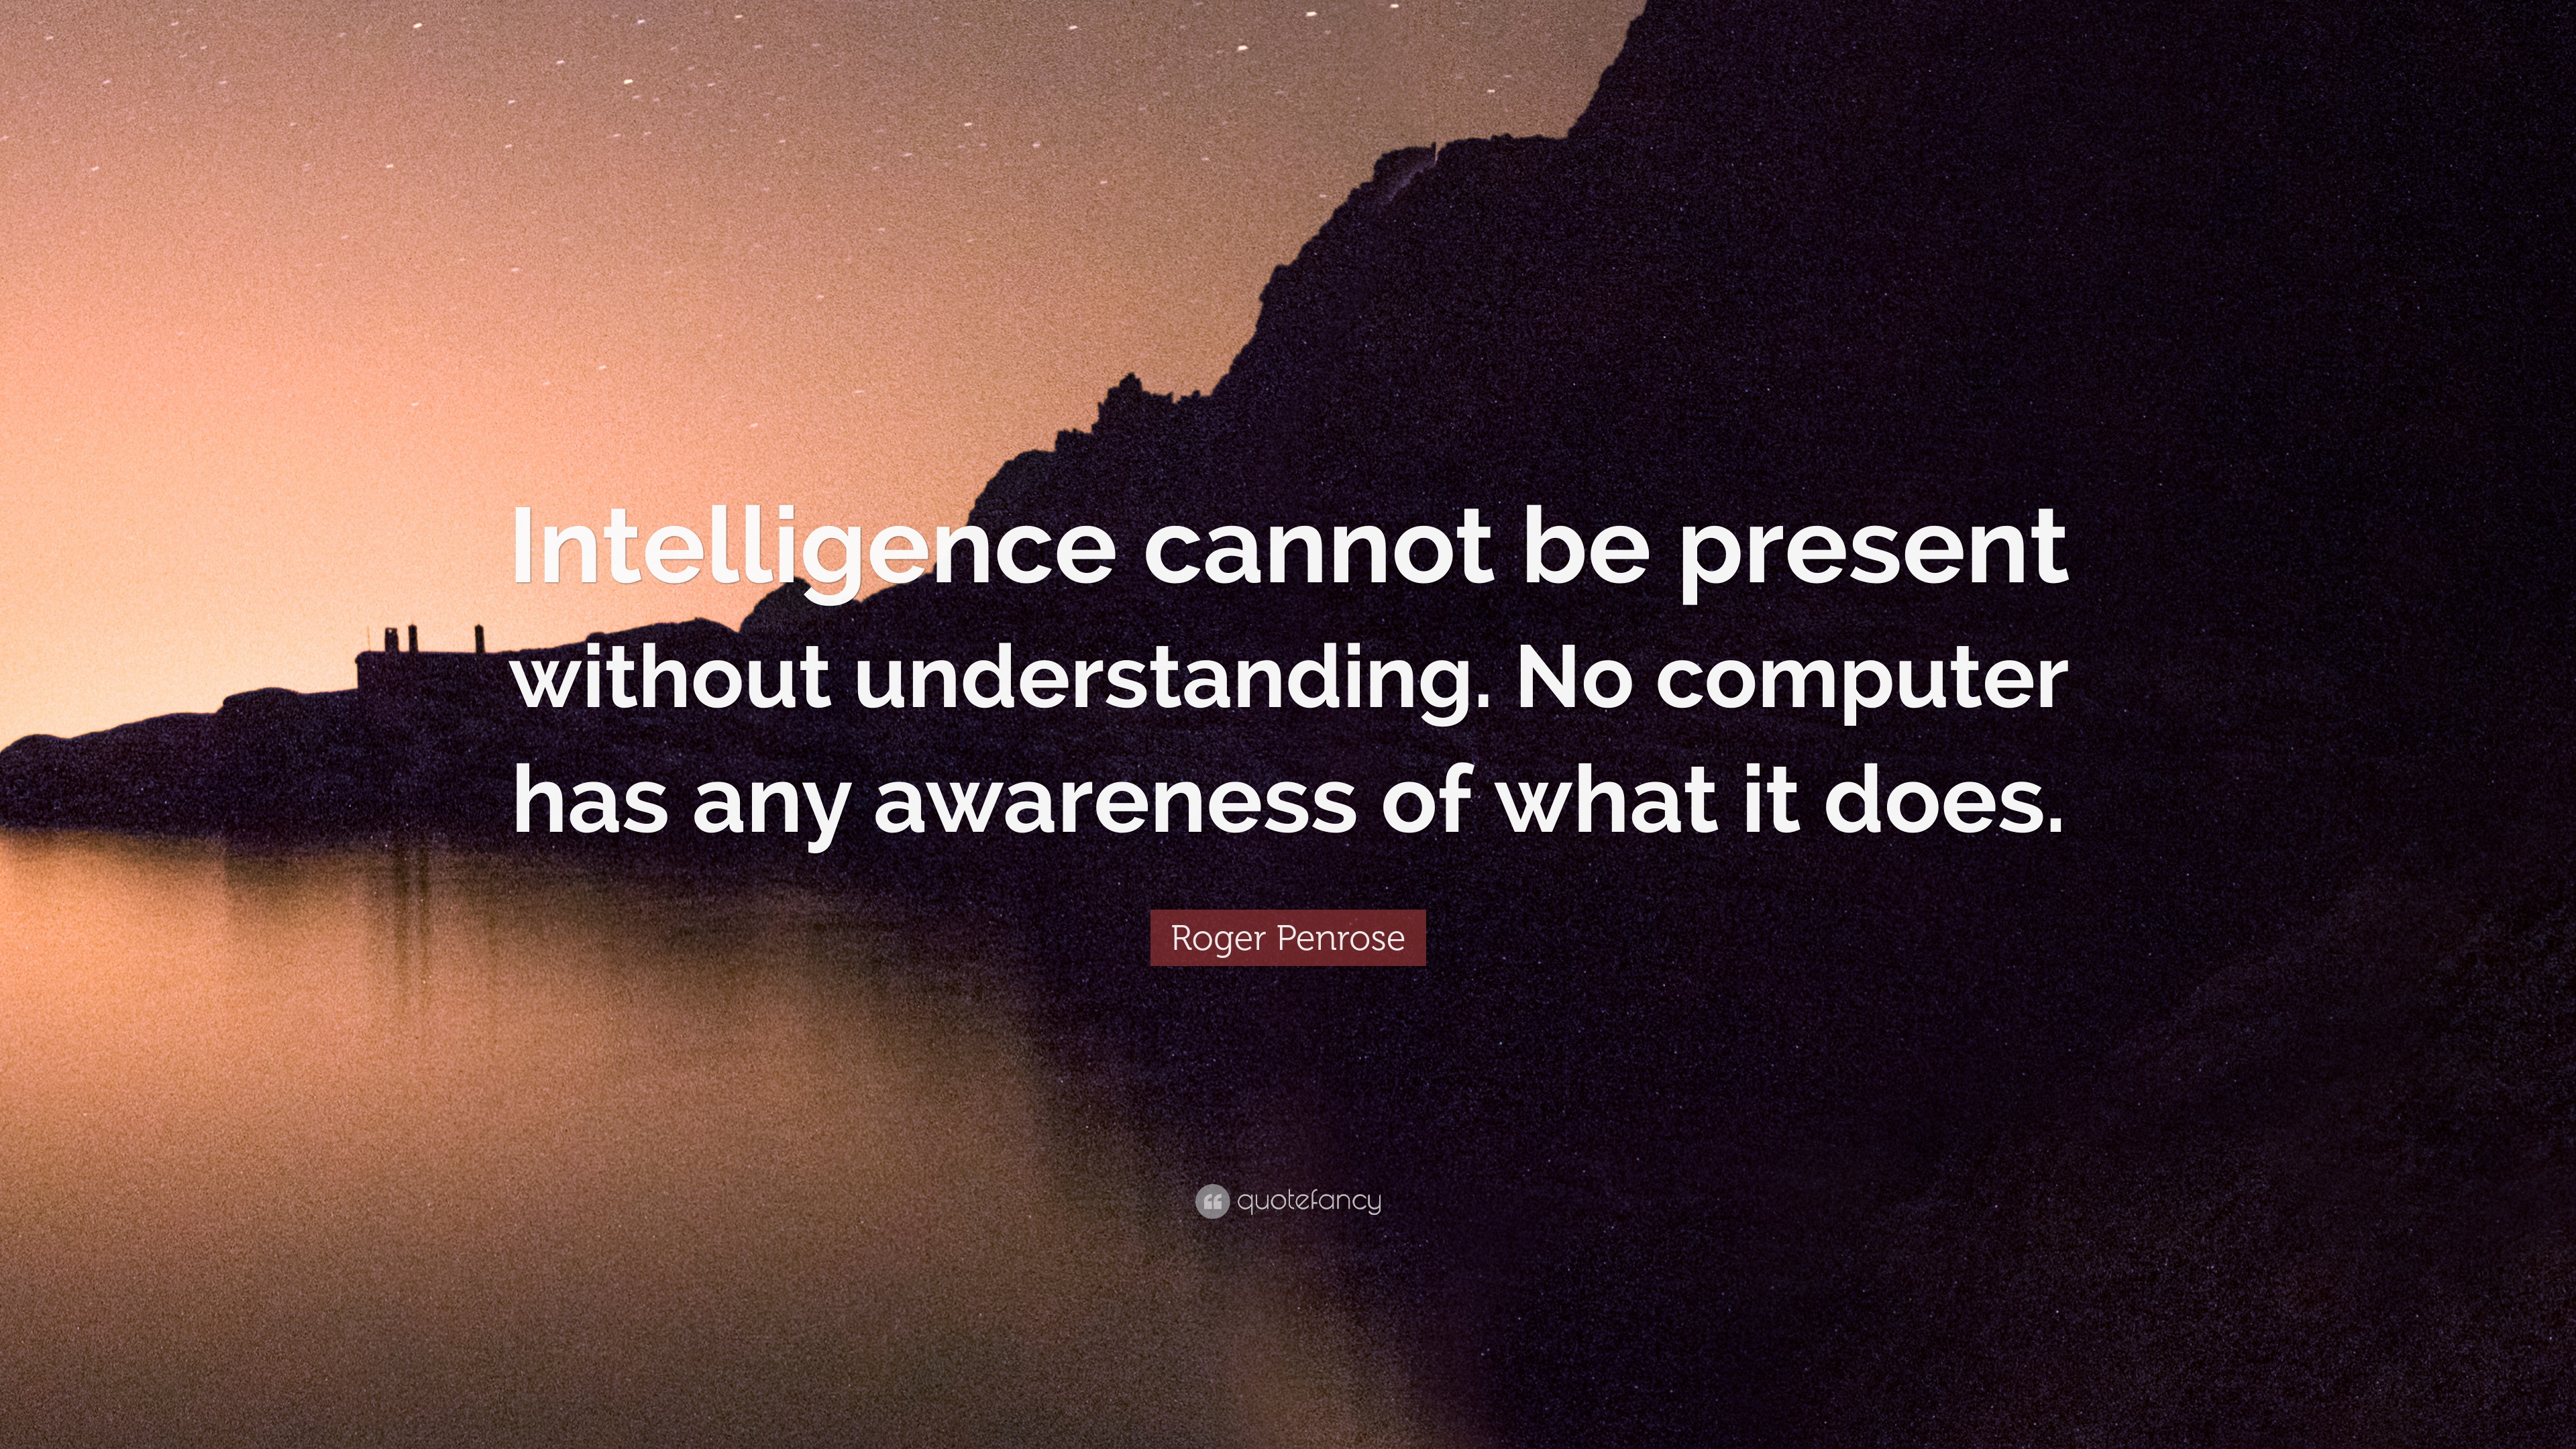 Top 30 Roger Penrose Quotes (2023 Update) - Quotefancy